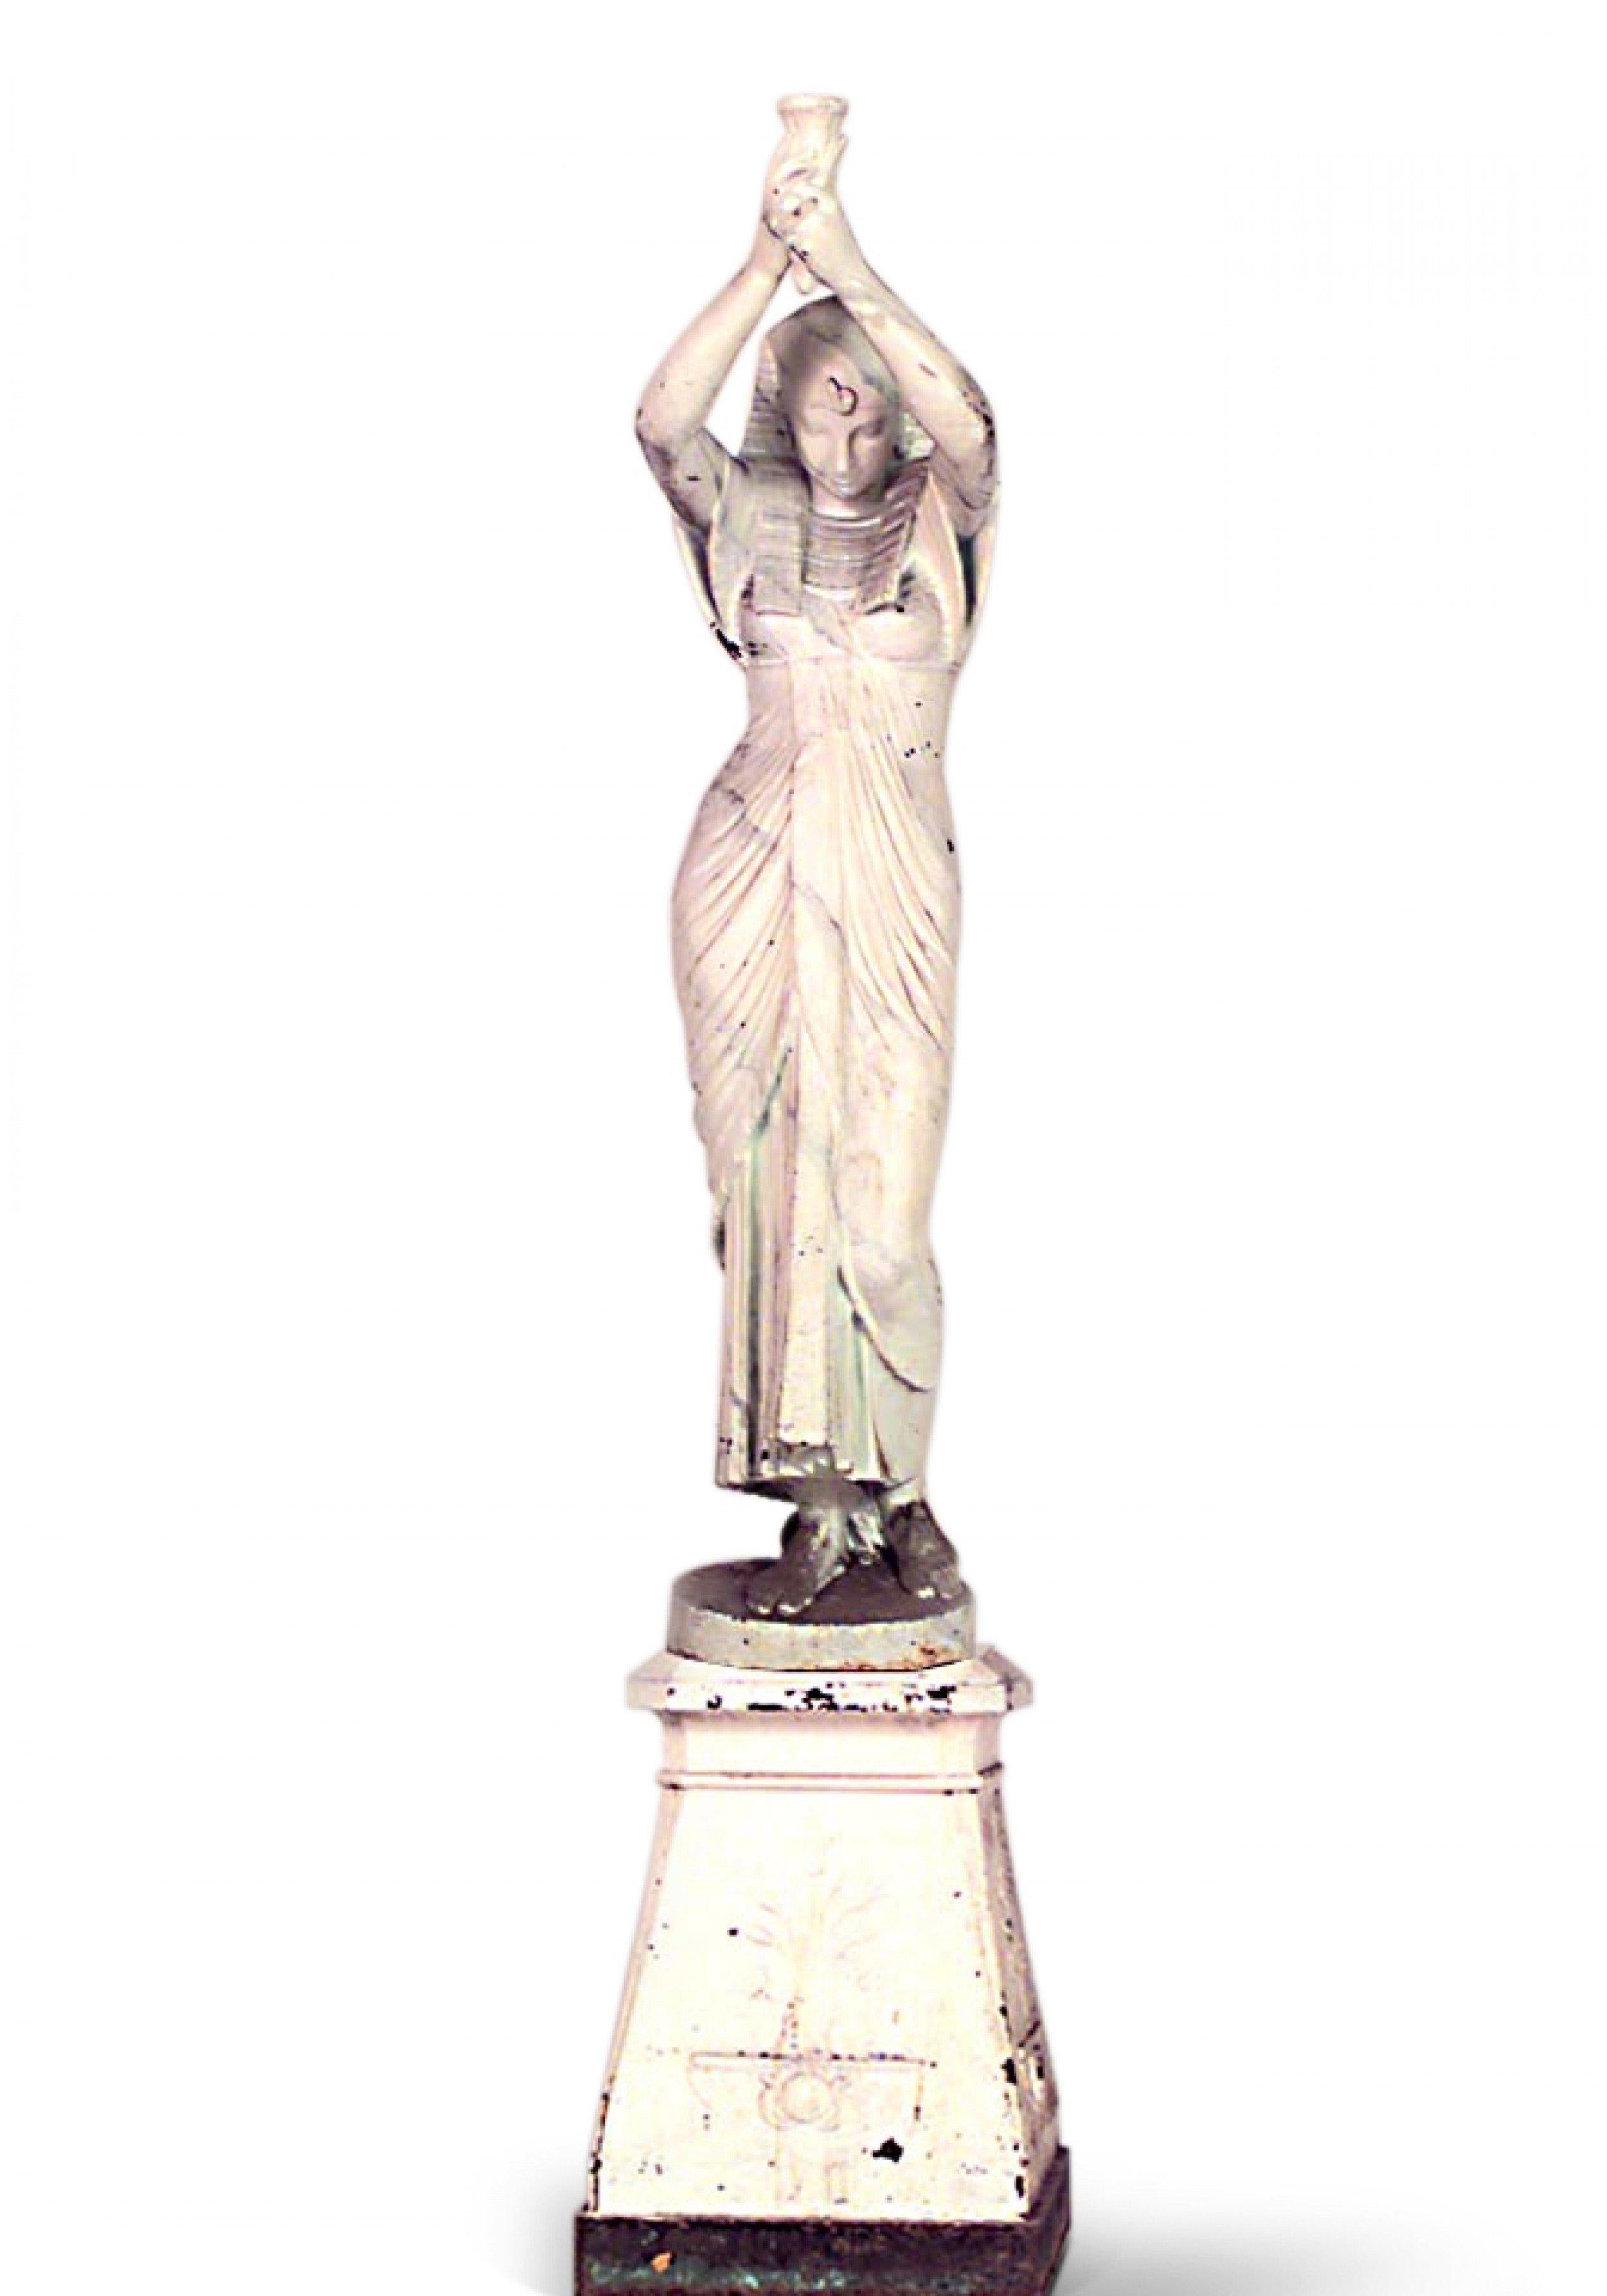 Pair of Outdoor French Egyptian Revival style cast iron women, each holding a torch aloft and standing on spreading square bases (mid 19th Cent., attr. Val D'Osne)
